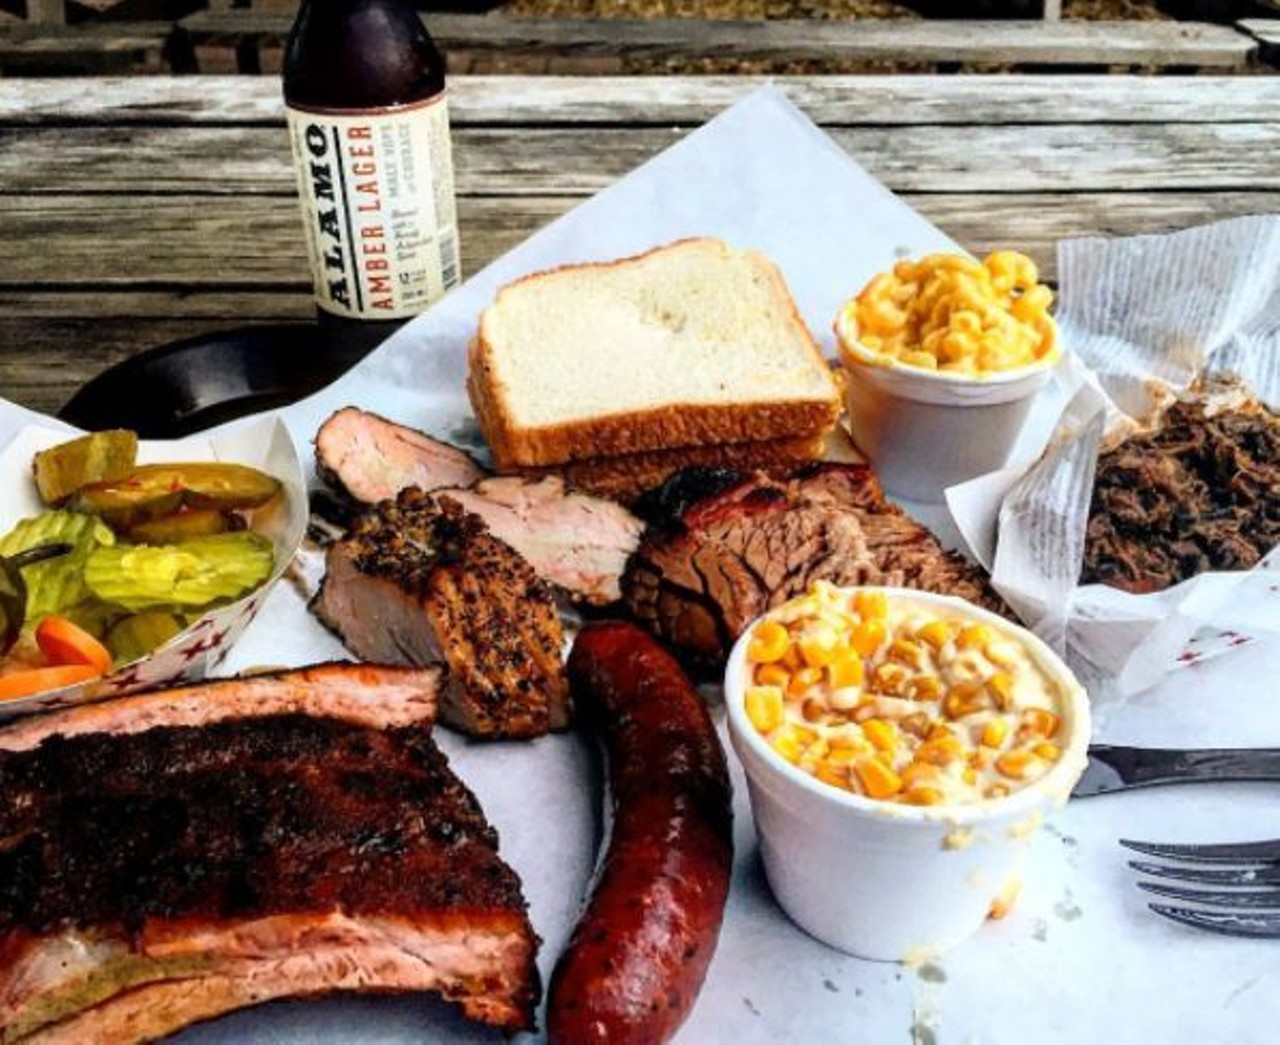 Two Bros. BBQ Market
12656 West Ave.,  (210) 496-0222
Chef Jason Dady can do a lot &#151; especially make a mean brisket. 
Photo via Instagram, mcsessions